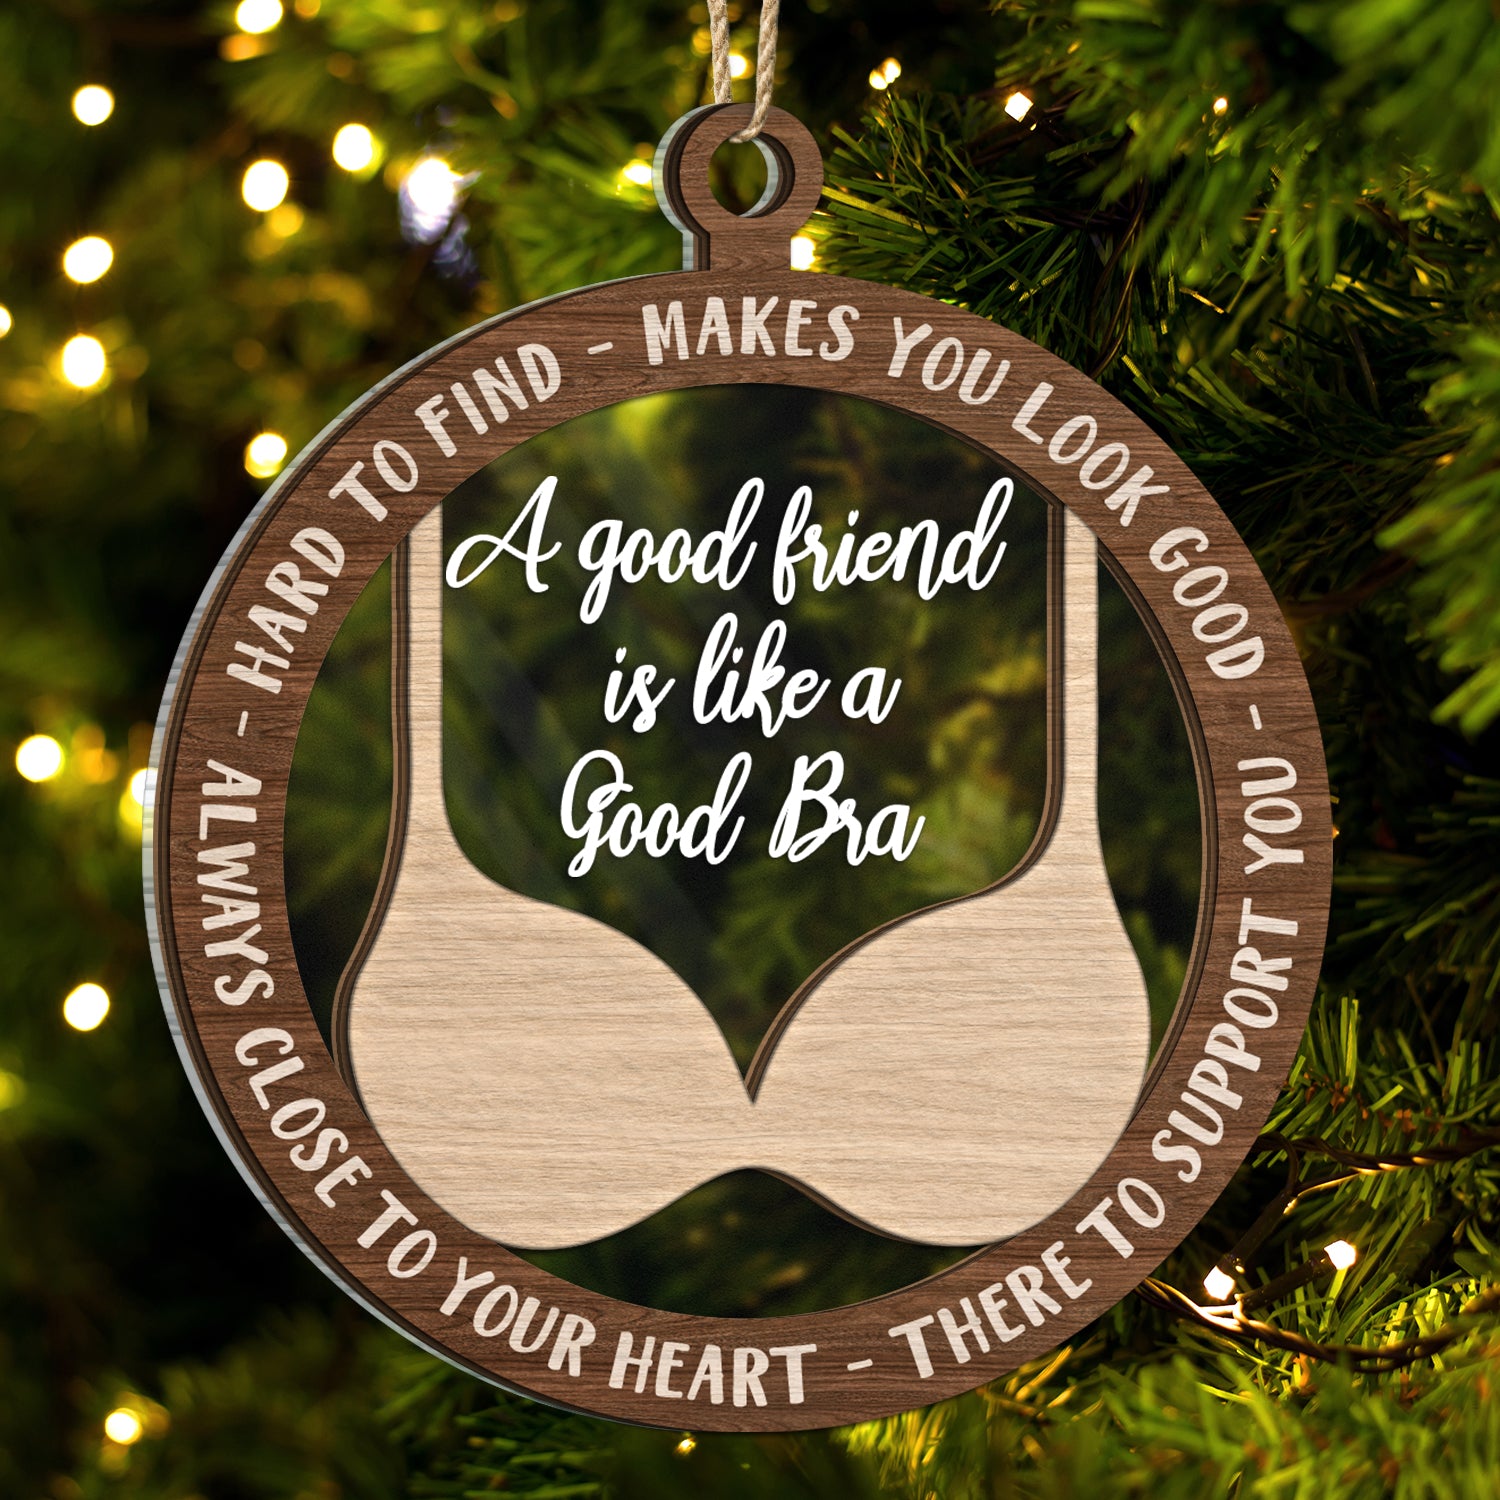 A Good Friend Is Like A Good Bra - Christmas Gifts For Best Friends, Besties - Personalized 2-Layered Mix Ornament